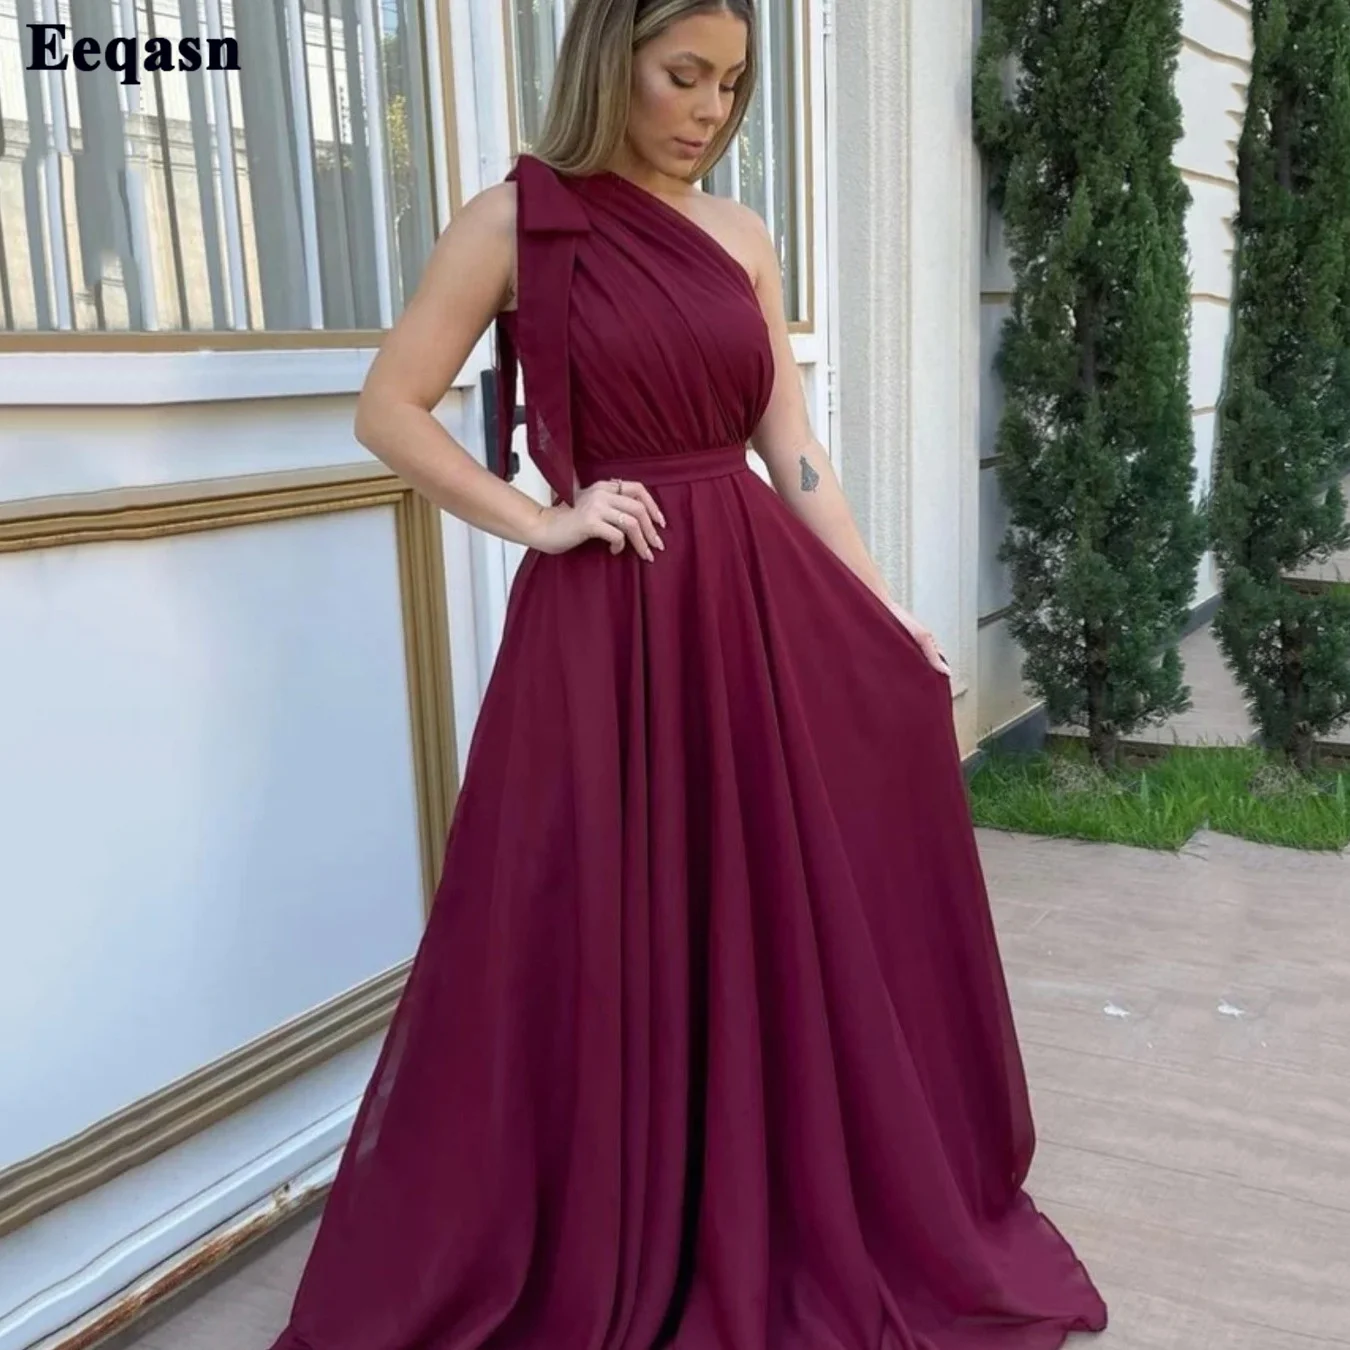 

Eeqasn A Line Chiffon Long Prom Dresses One Shoulder Pleats Formal Wedding Party Bridesmaid Dress Women Prom Gowns Pageant Dress